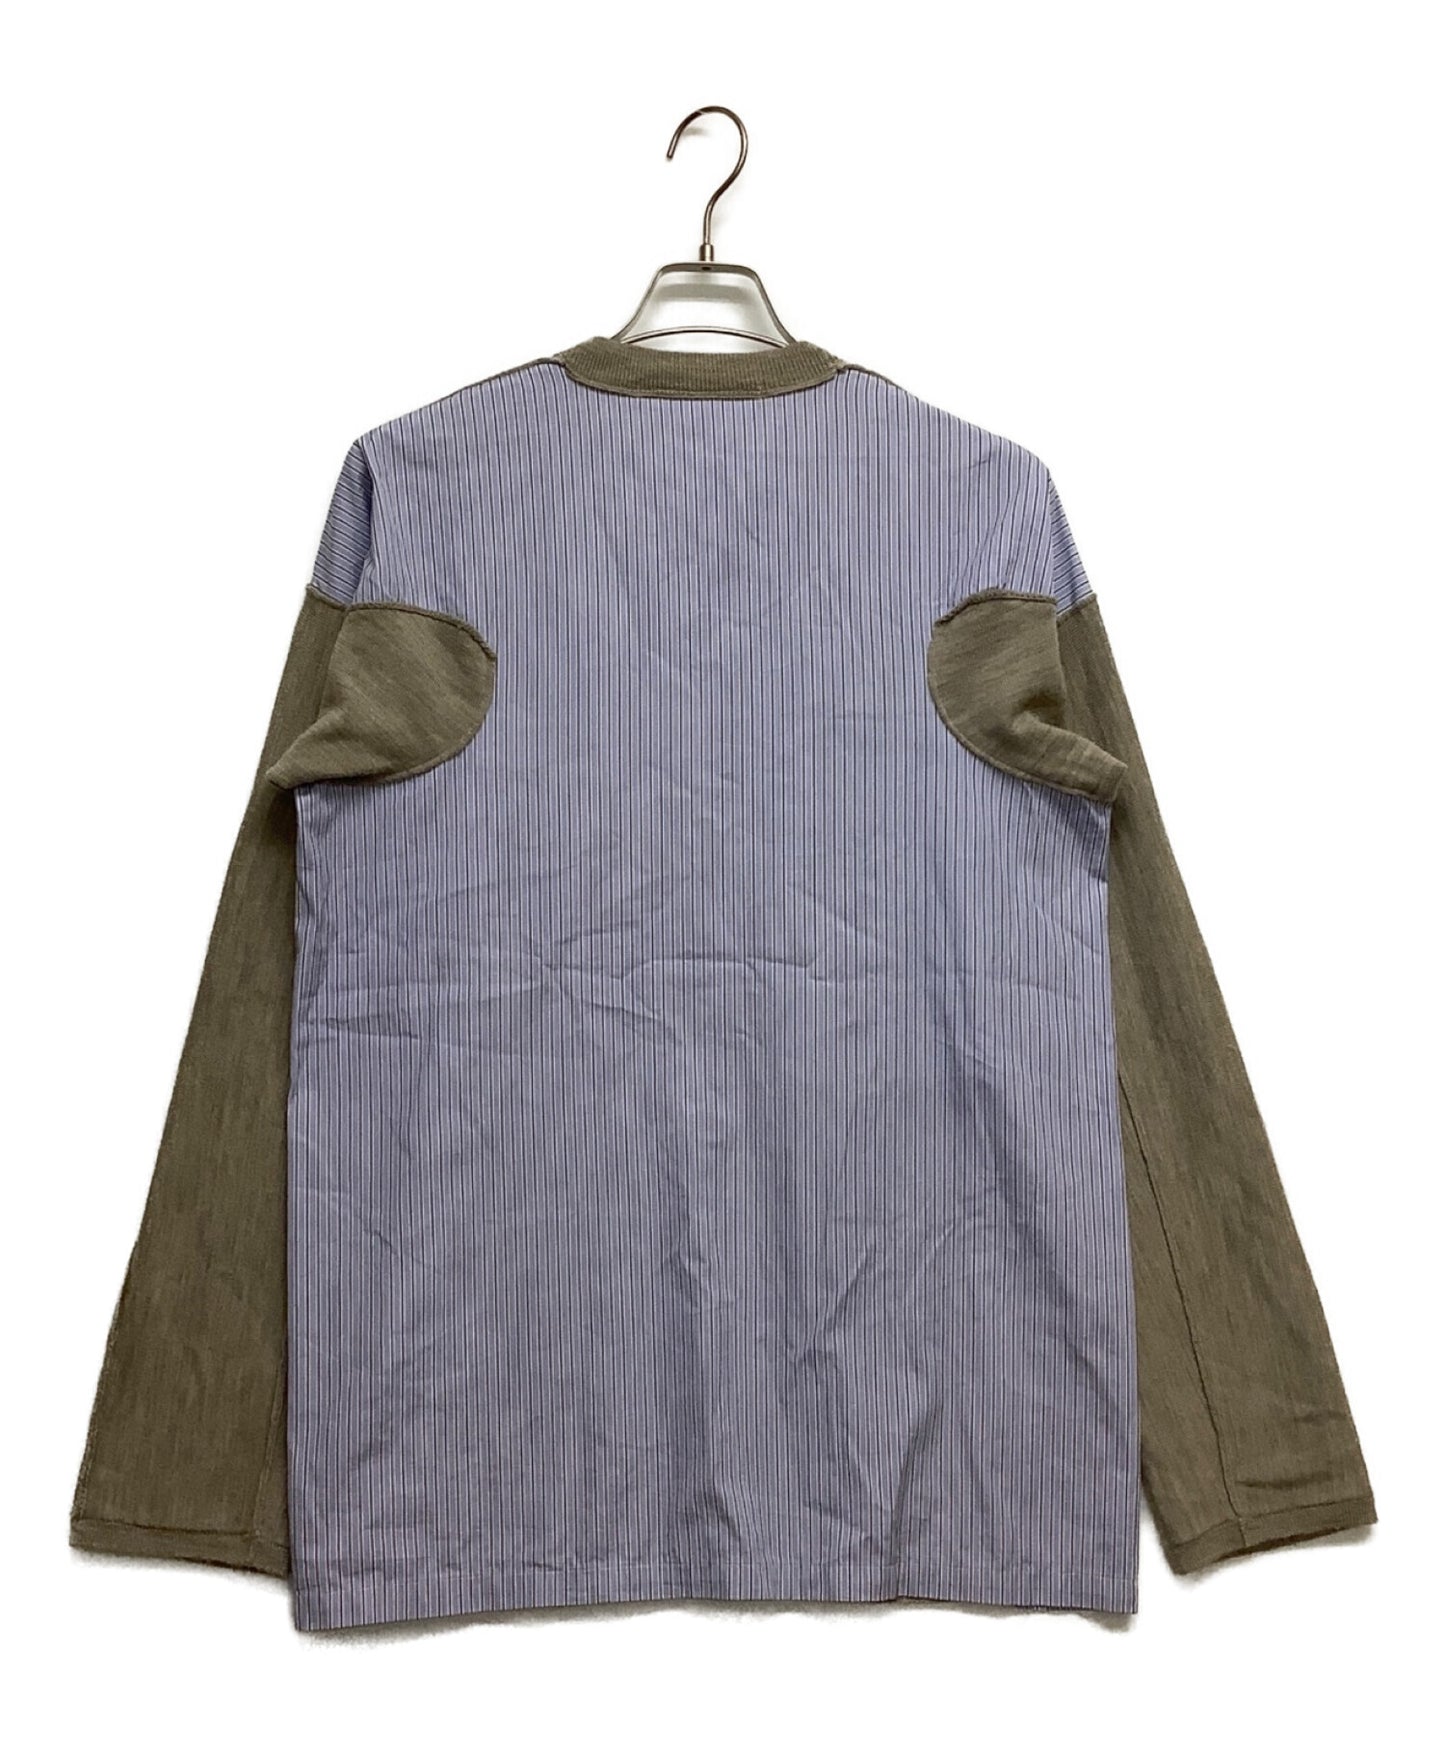 Comme des Garcons Stripe-Switched针织套头衫S28502